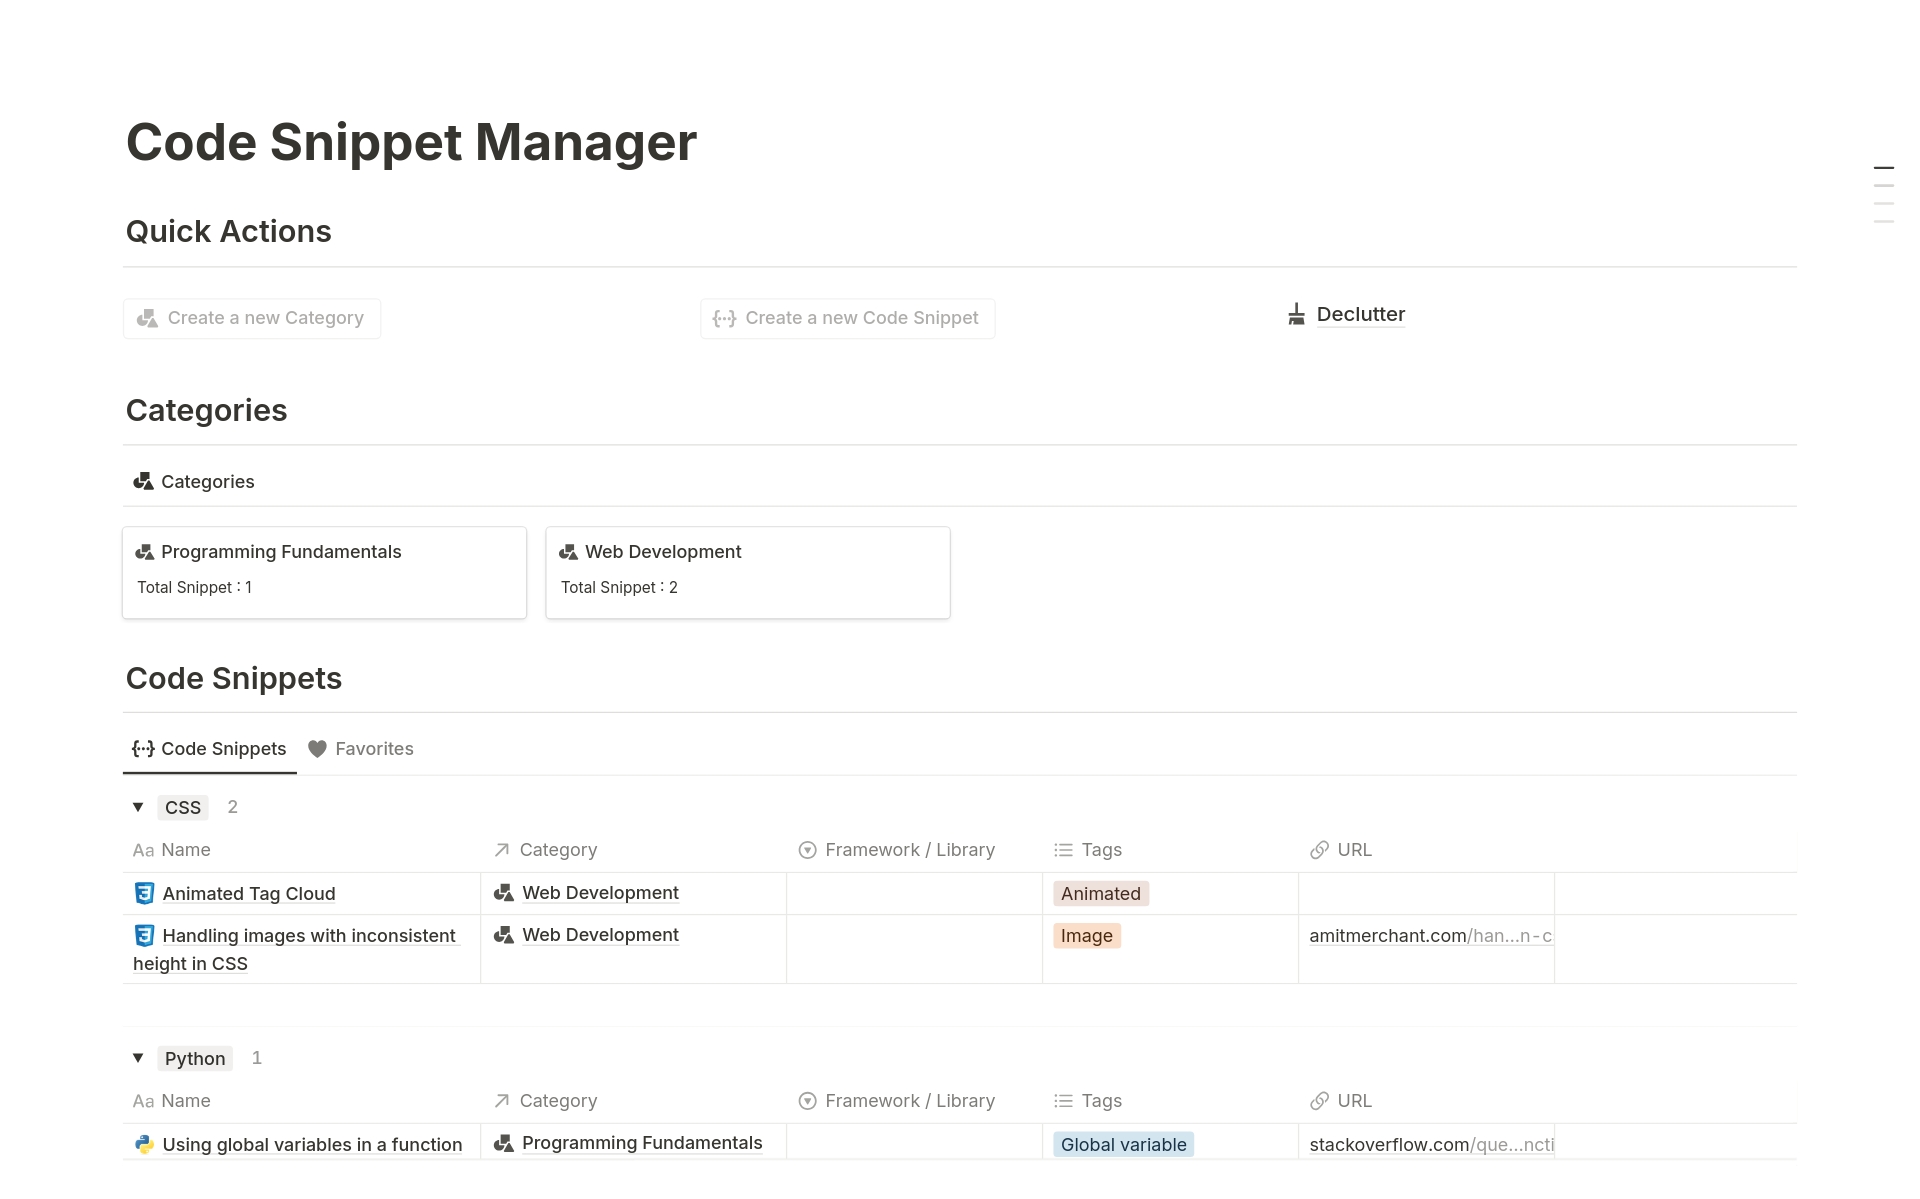 This is the Code Snippet Manager, your new command center for organizing the code snippets scattered across your coding realm.

Organize, categorize and access code examples with a few clicks - a simple solution that brings order to your creative chaos.